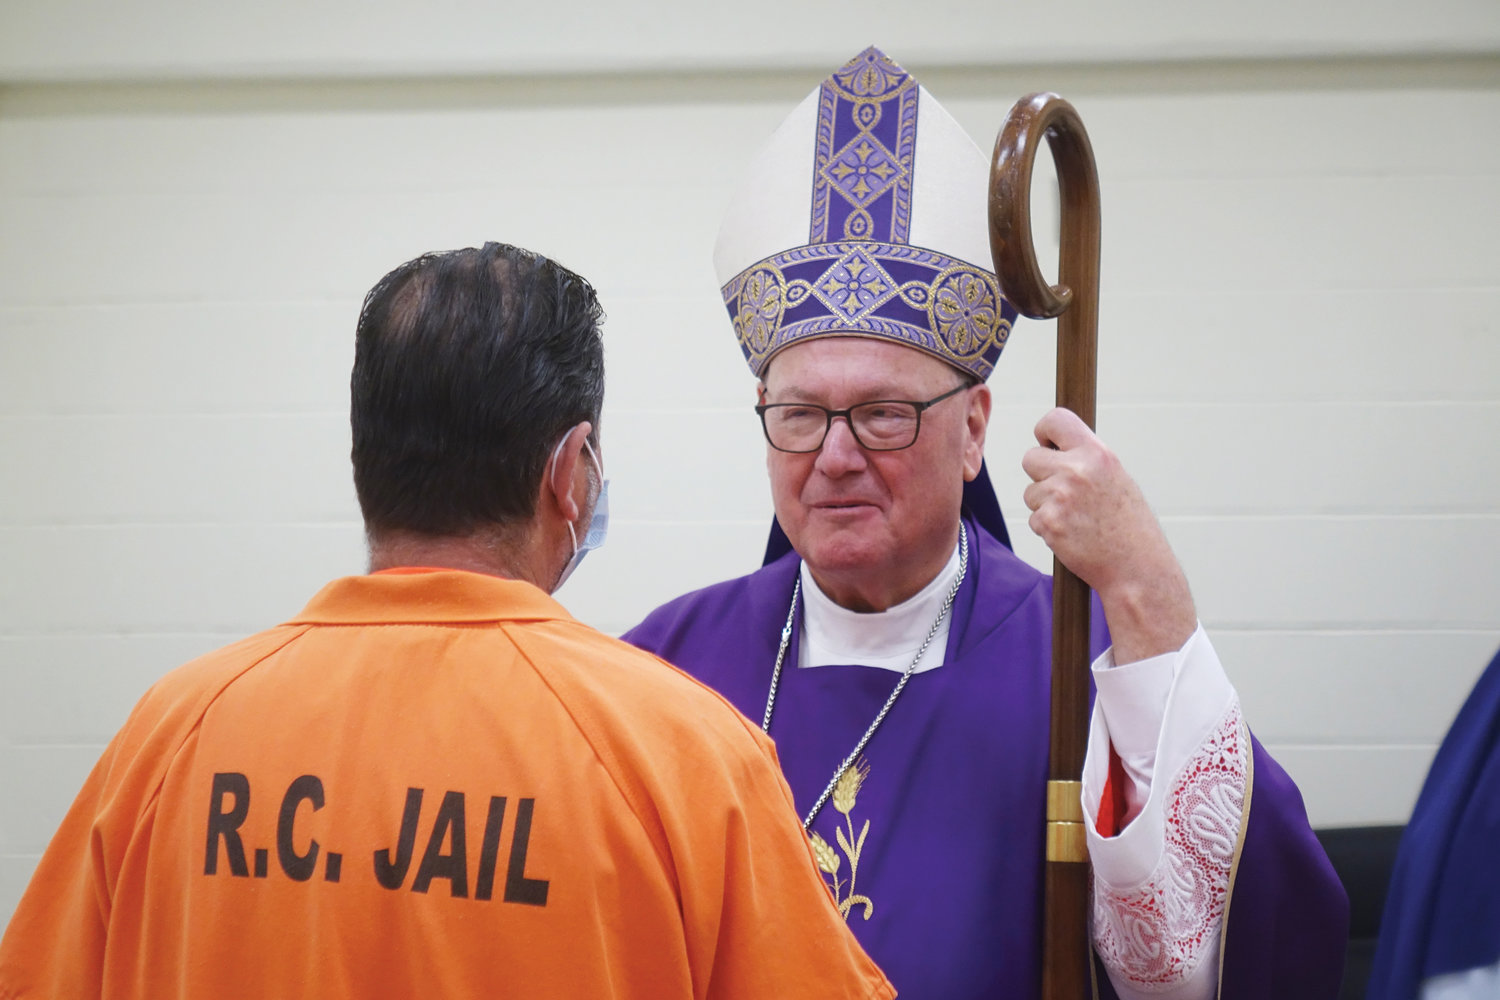 Cardinal Dolan speaks with an inmate.